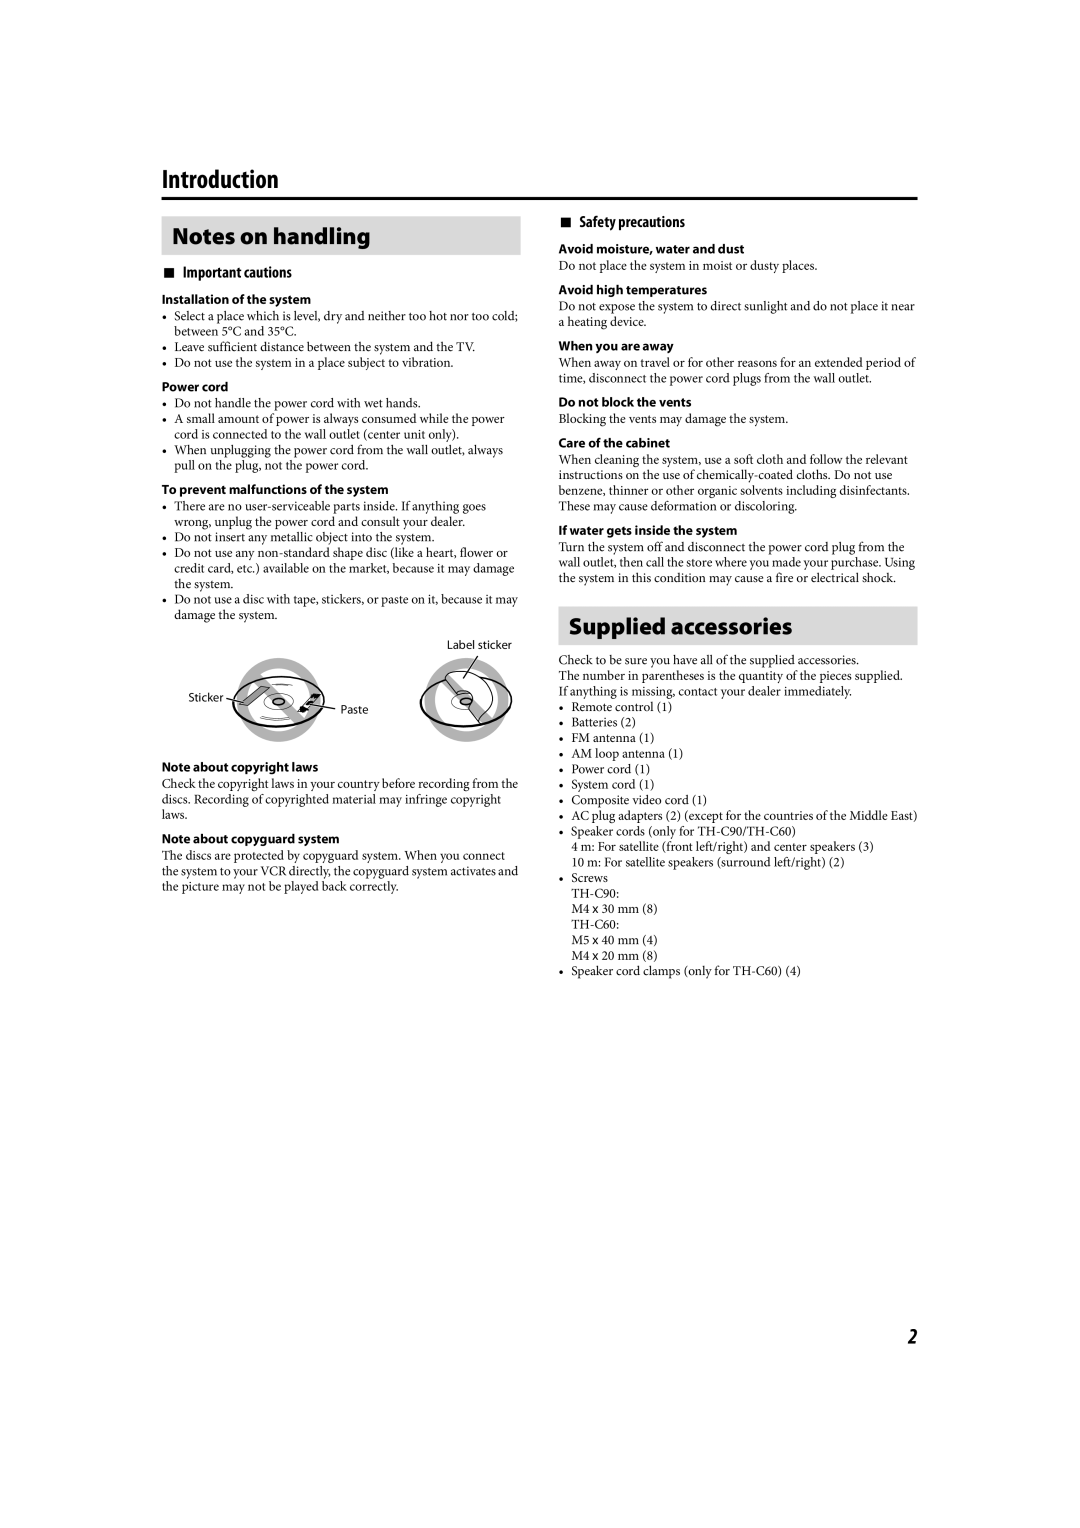 JVC LVT1504-005B manual Introduction, Notes on handling, Supplied accessories, 7Important cautions, 7Safety precautions 